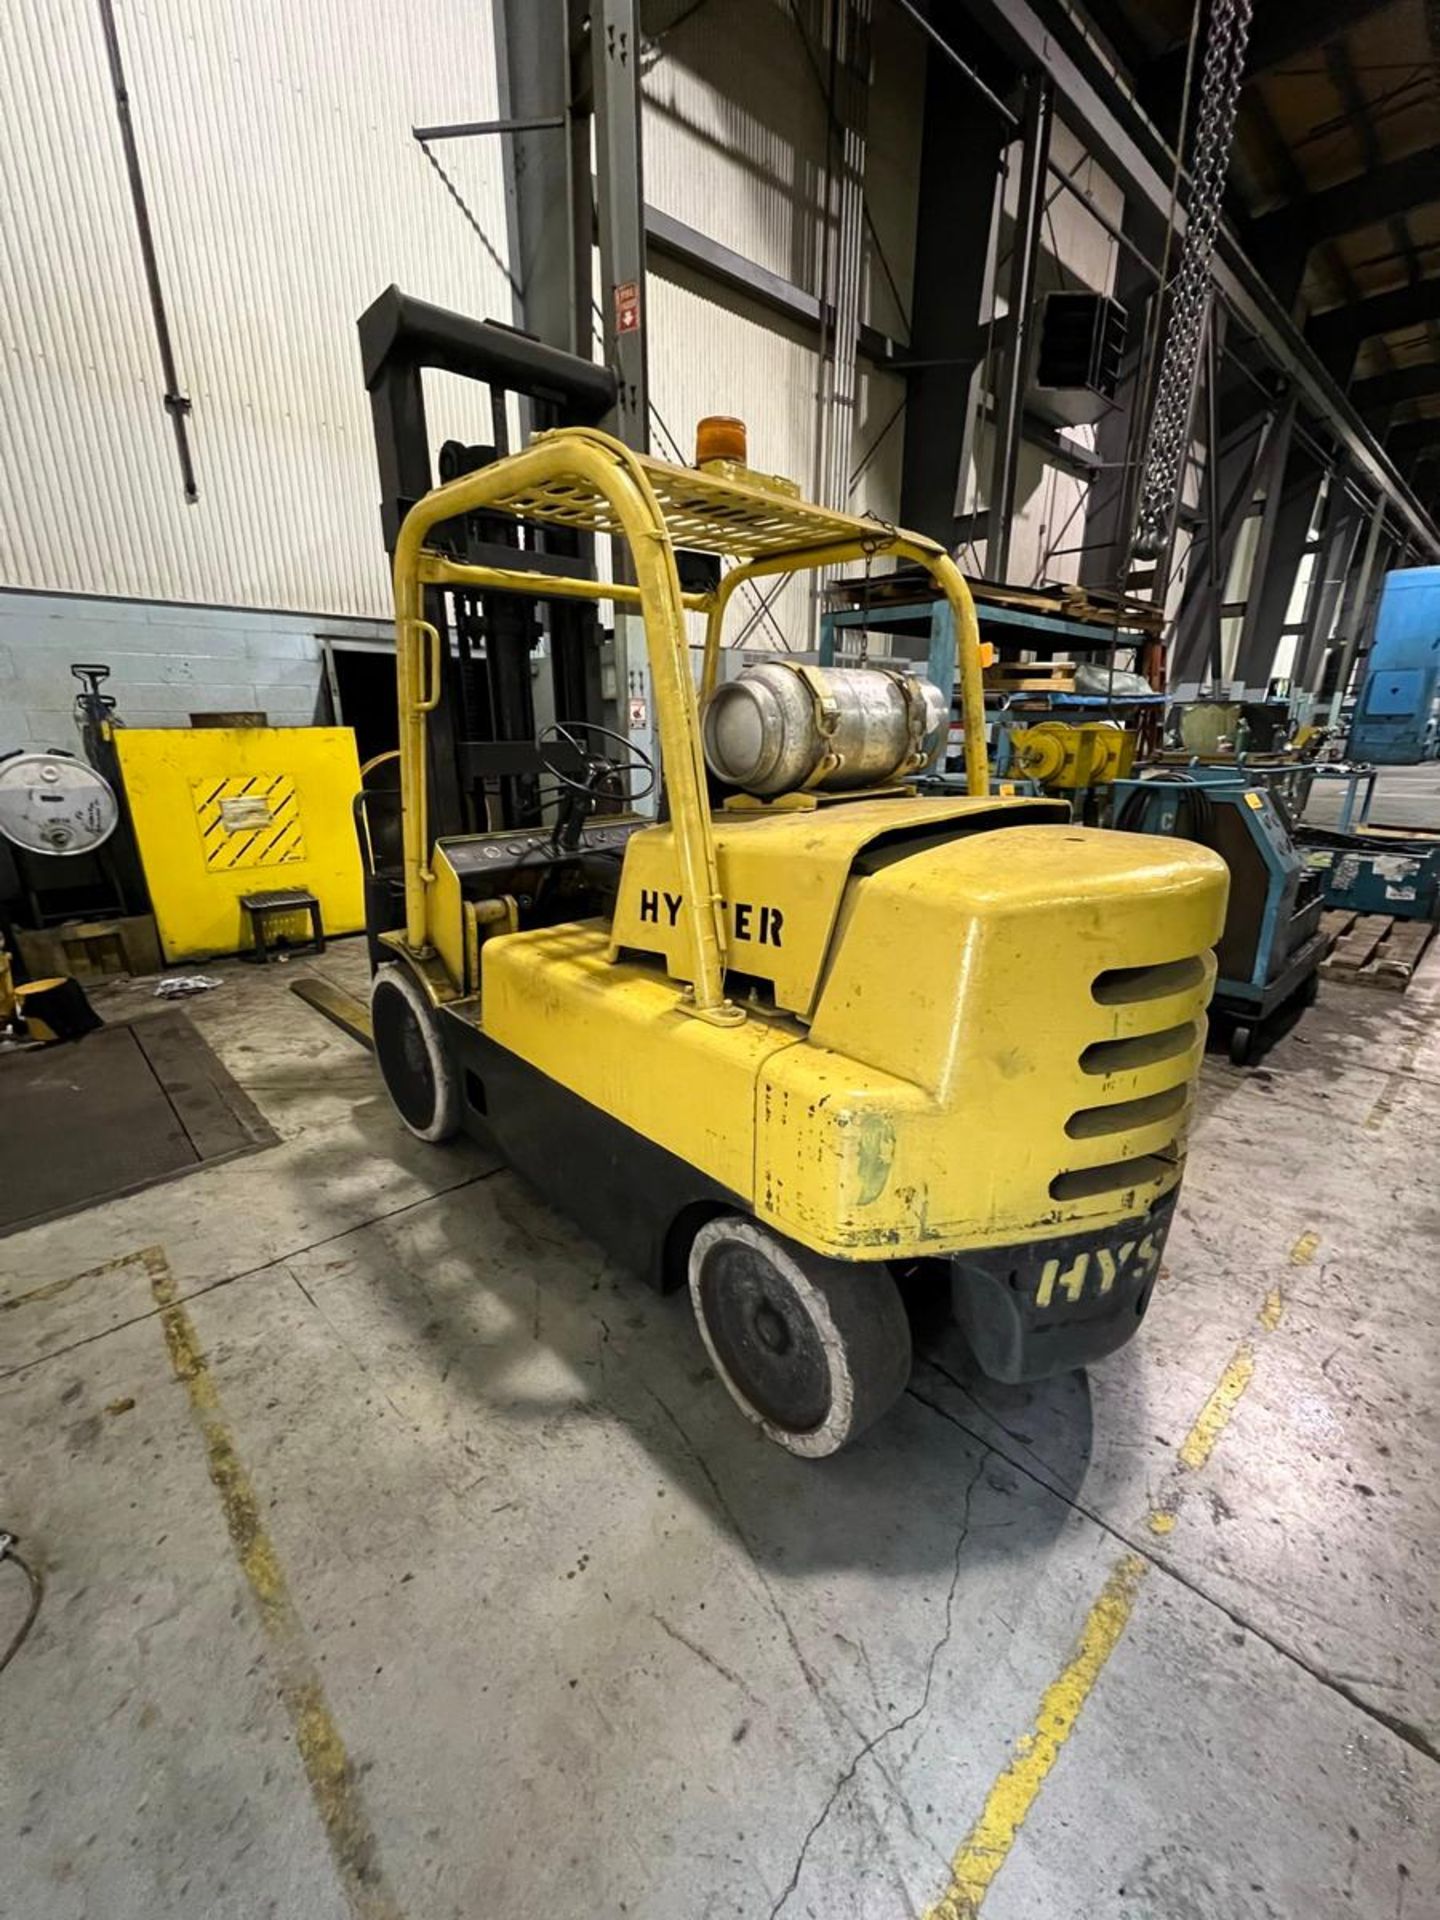 Hyster S150A 15,000 Lb Capacity LP Type Forklift - Image 2 of 8